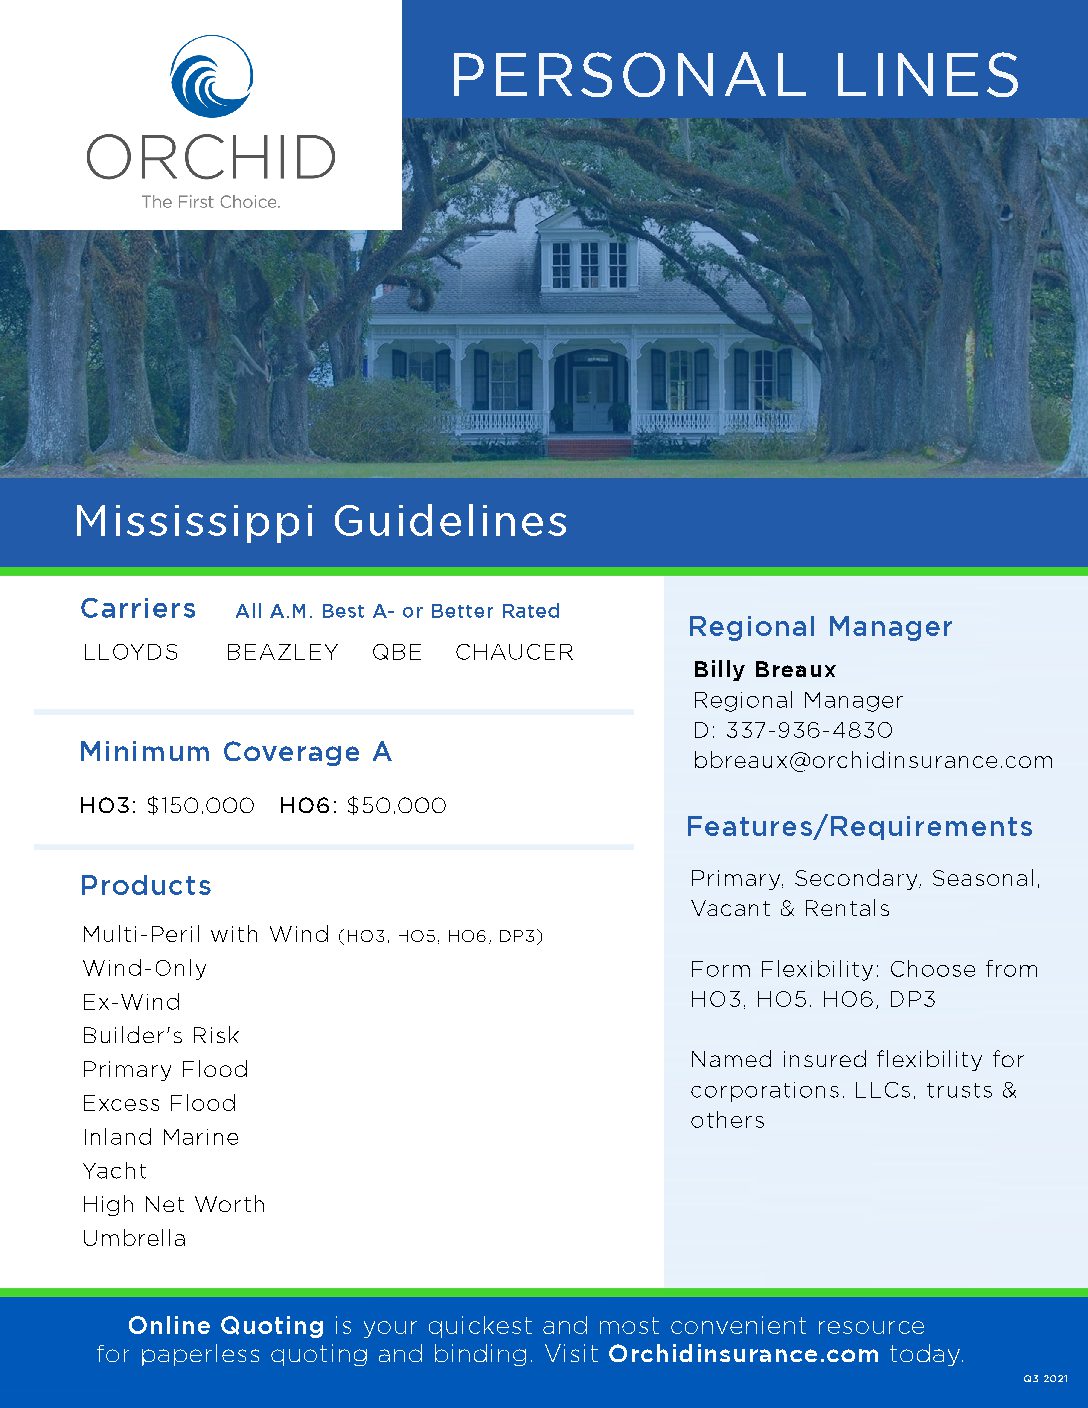 Mississippi Personal Lines Insurance